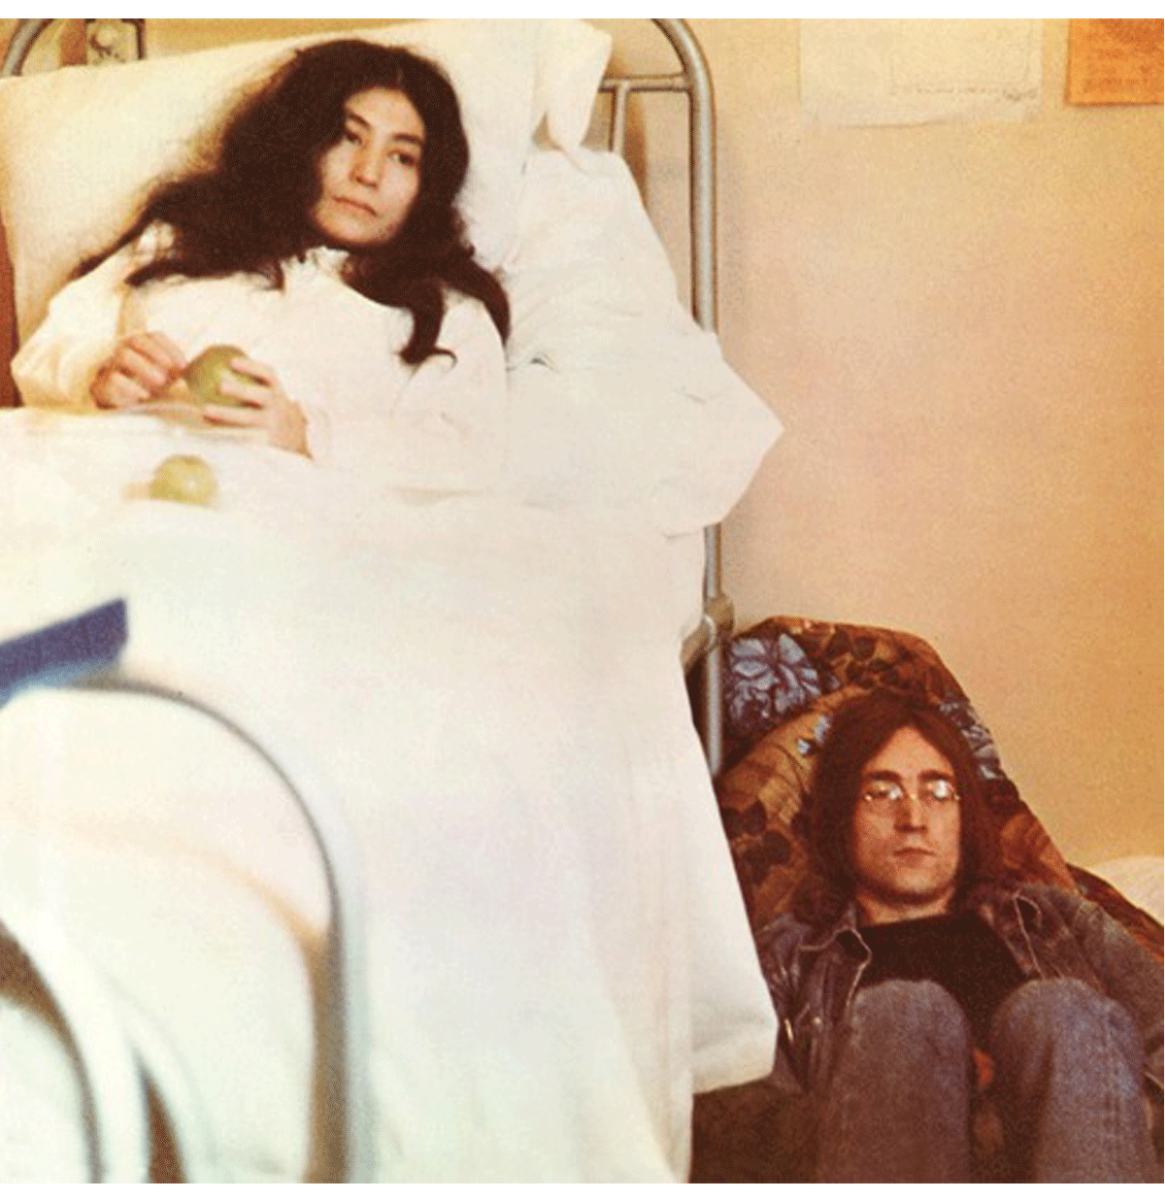 John Lennon And Yoko Ono - Unfinished Music No. 2: Life With The Lions LP